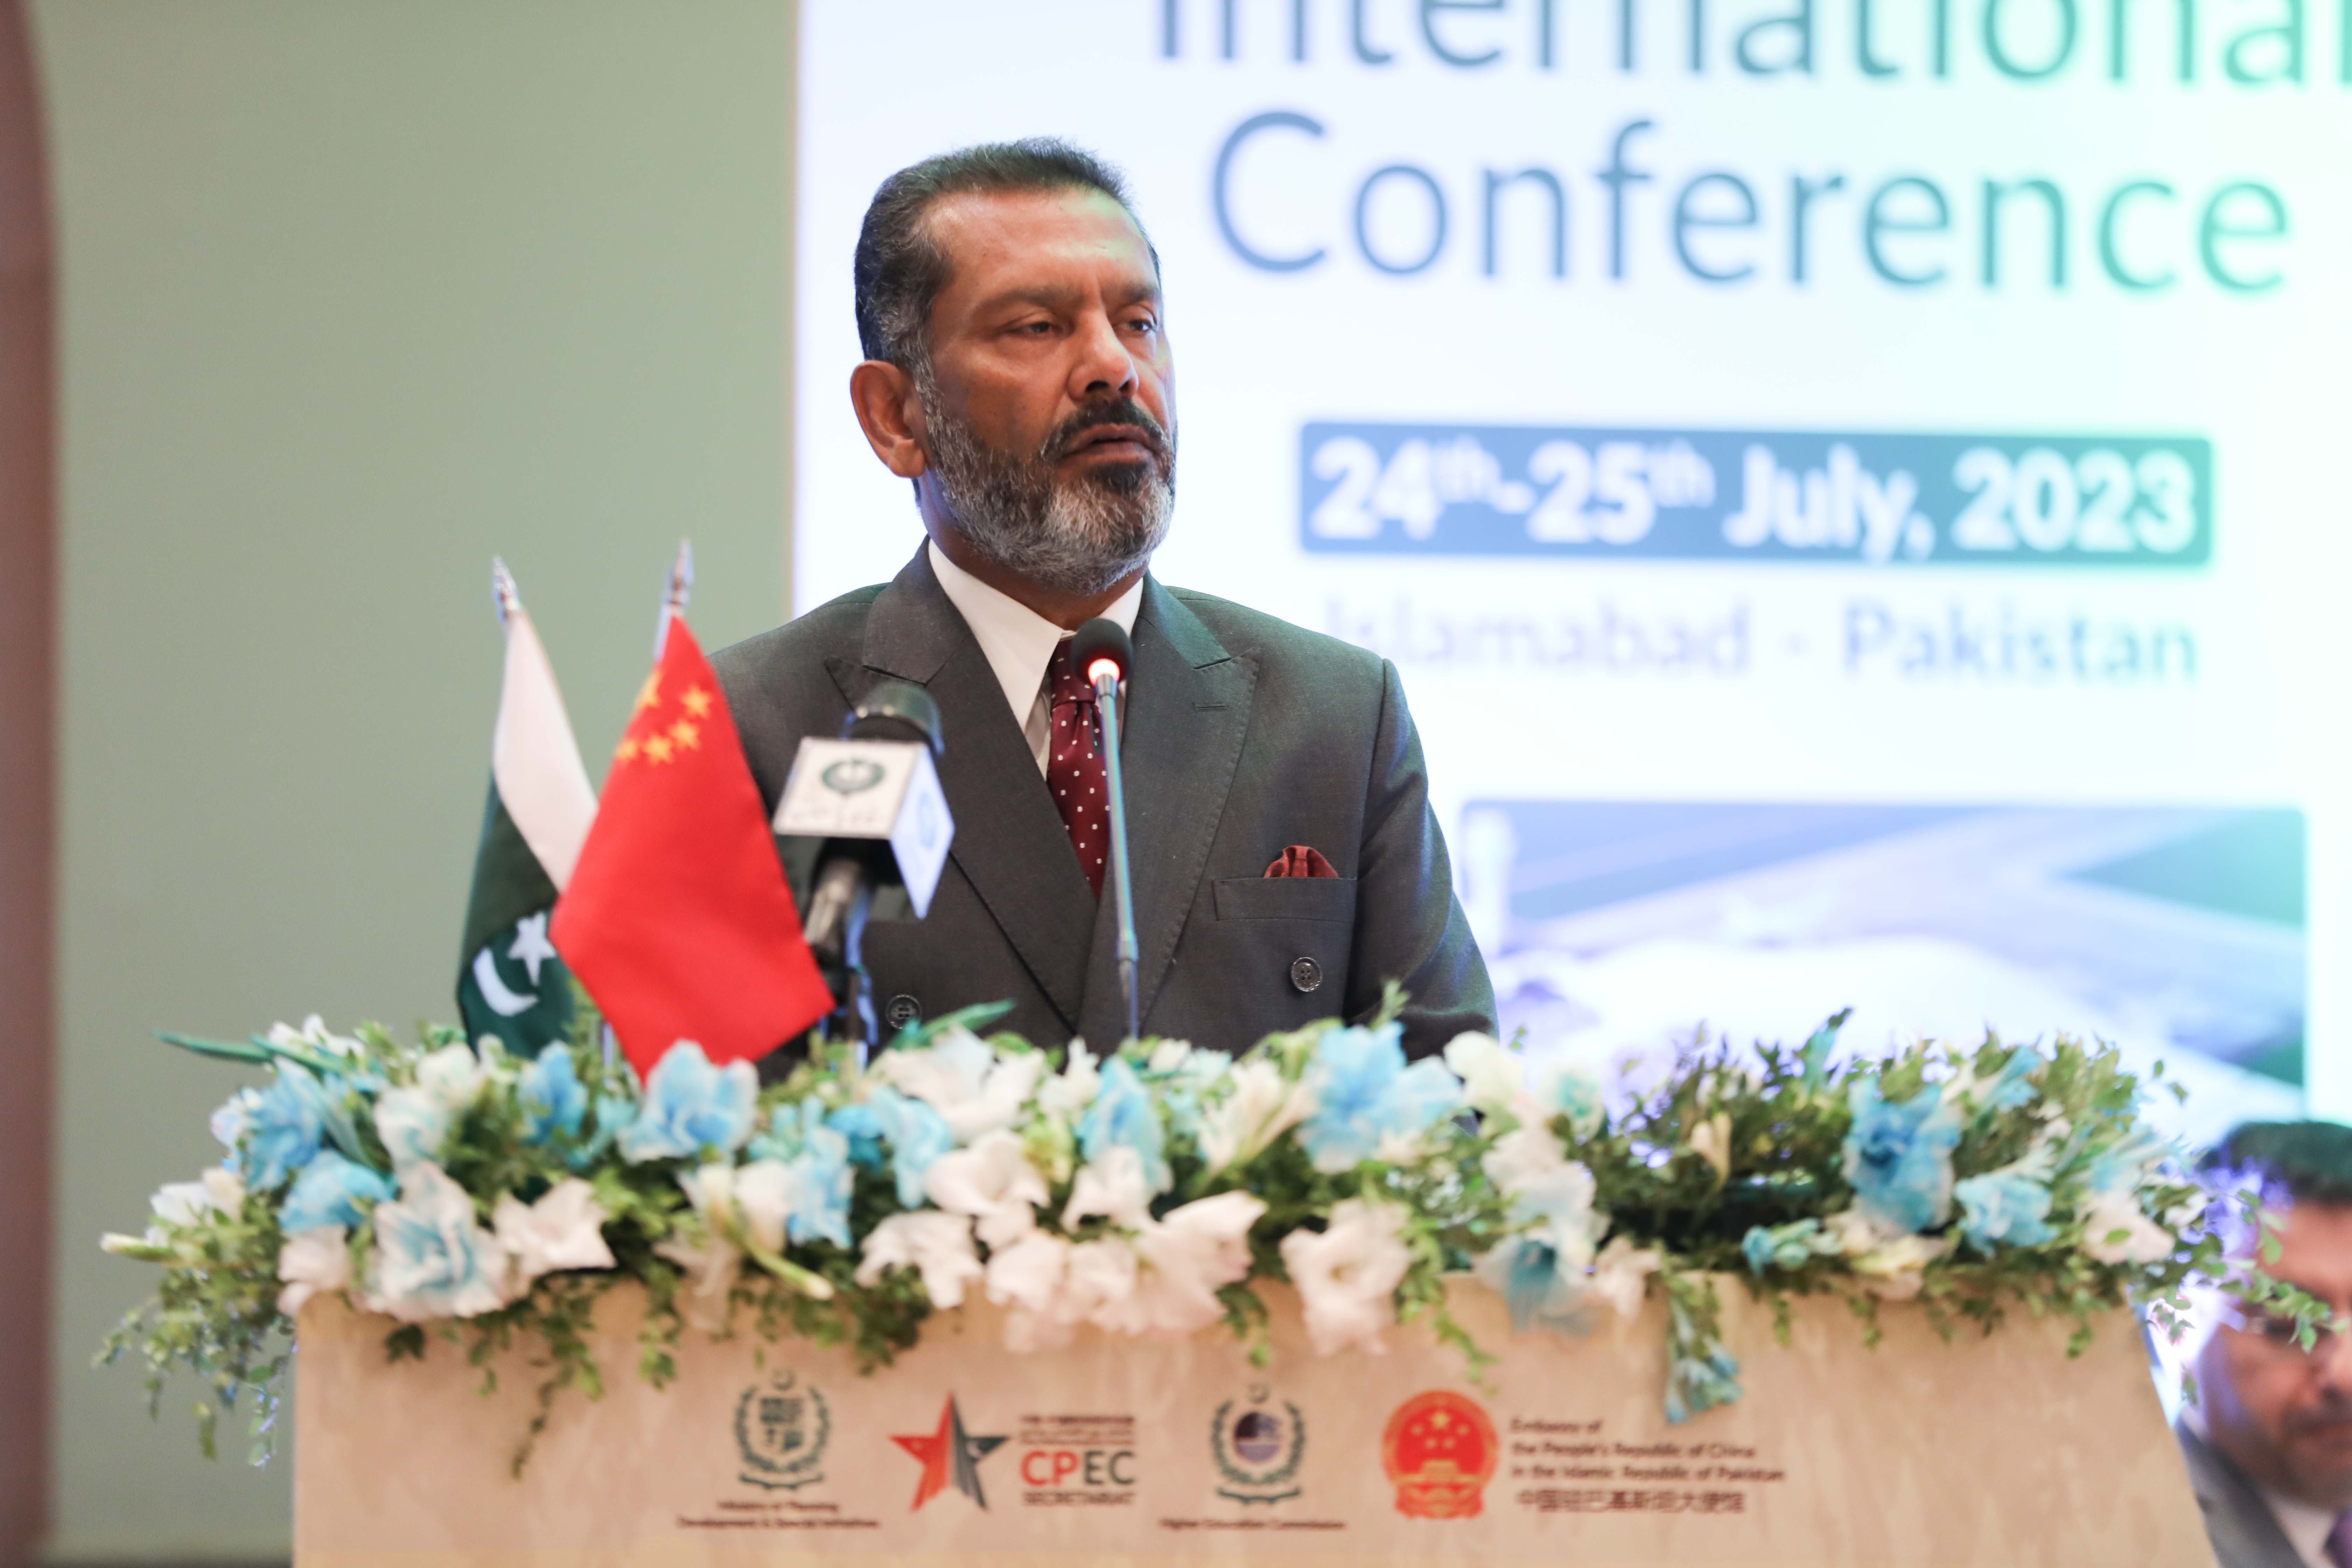 International Conference on Decade of CPEC & BRI: From Vision to Reality 24th - 25th July 2023